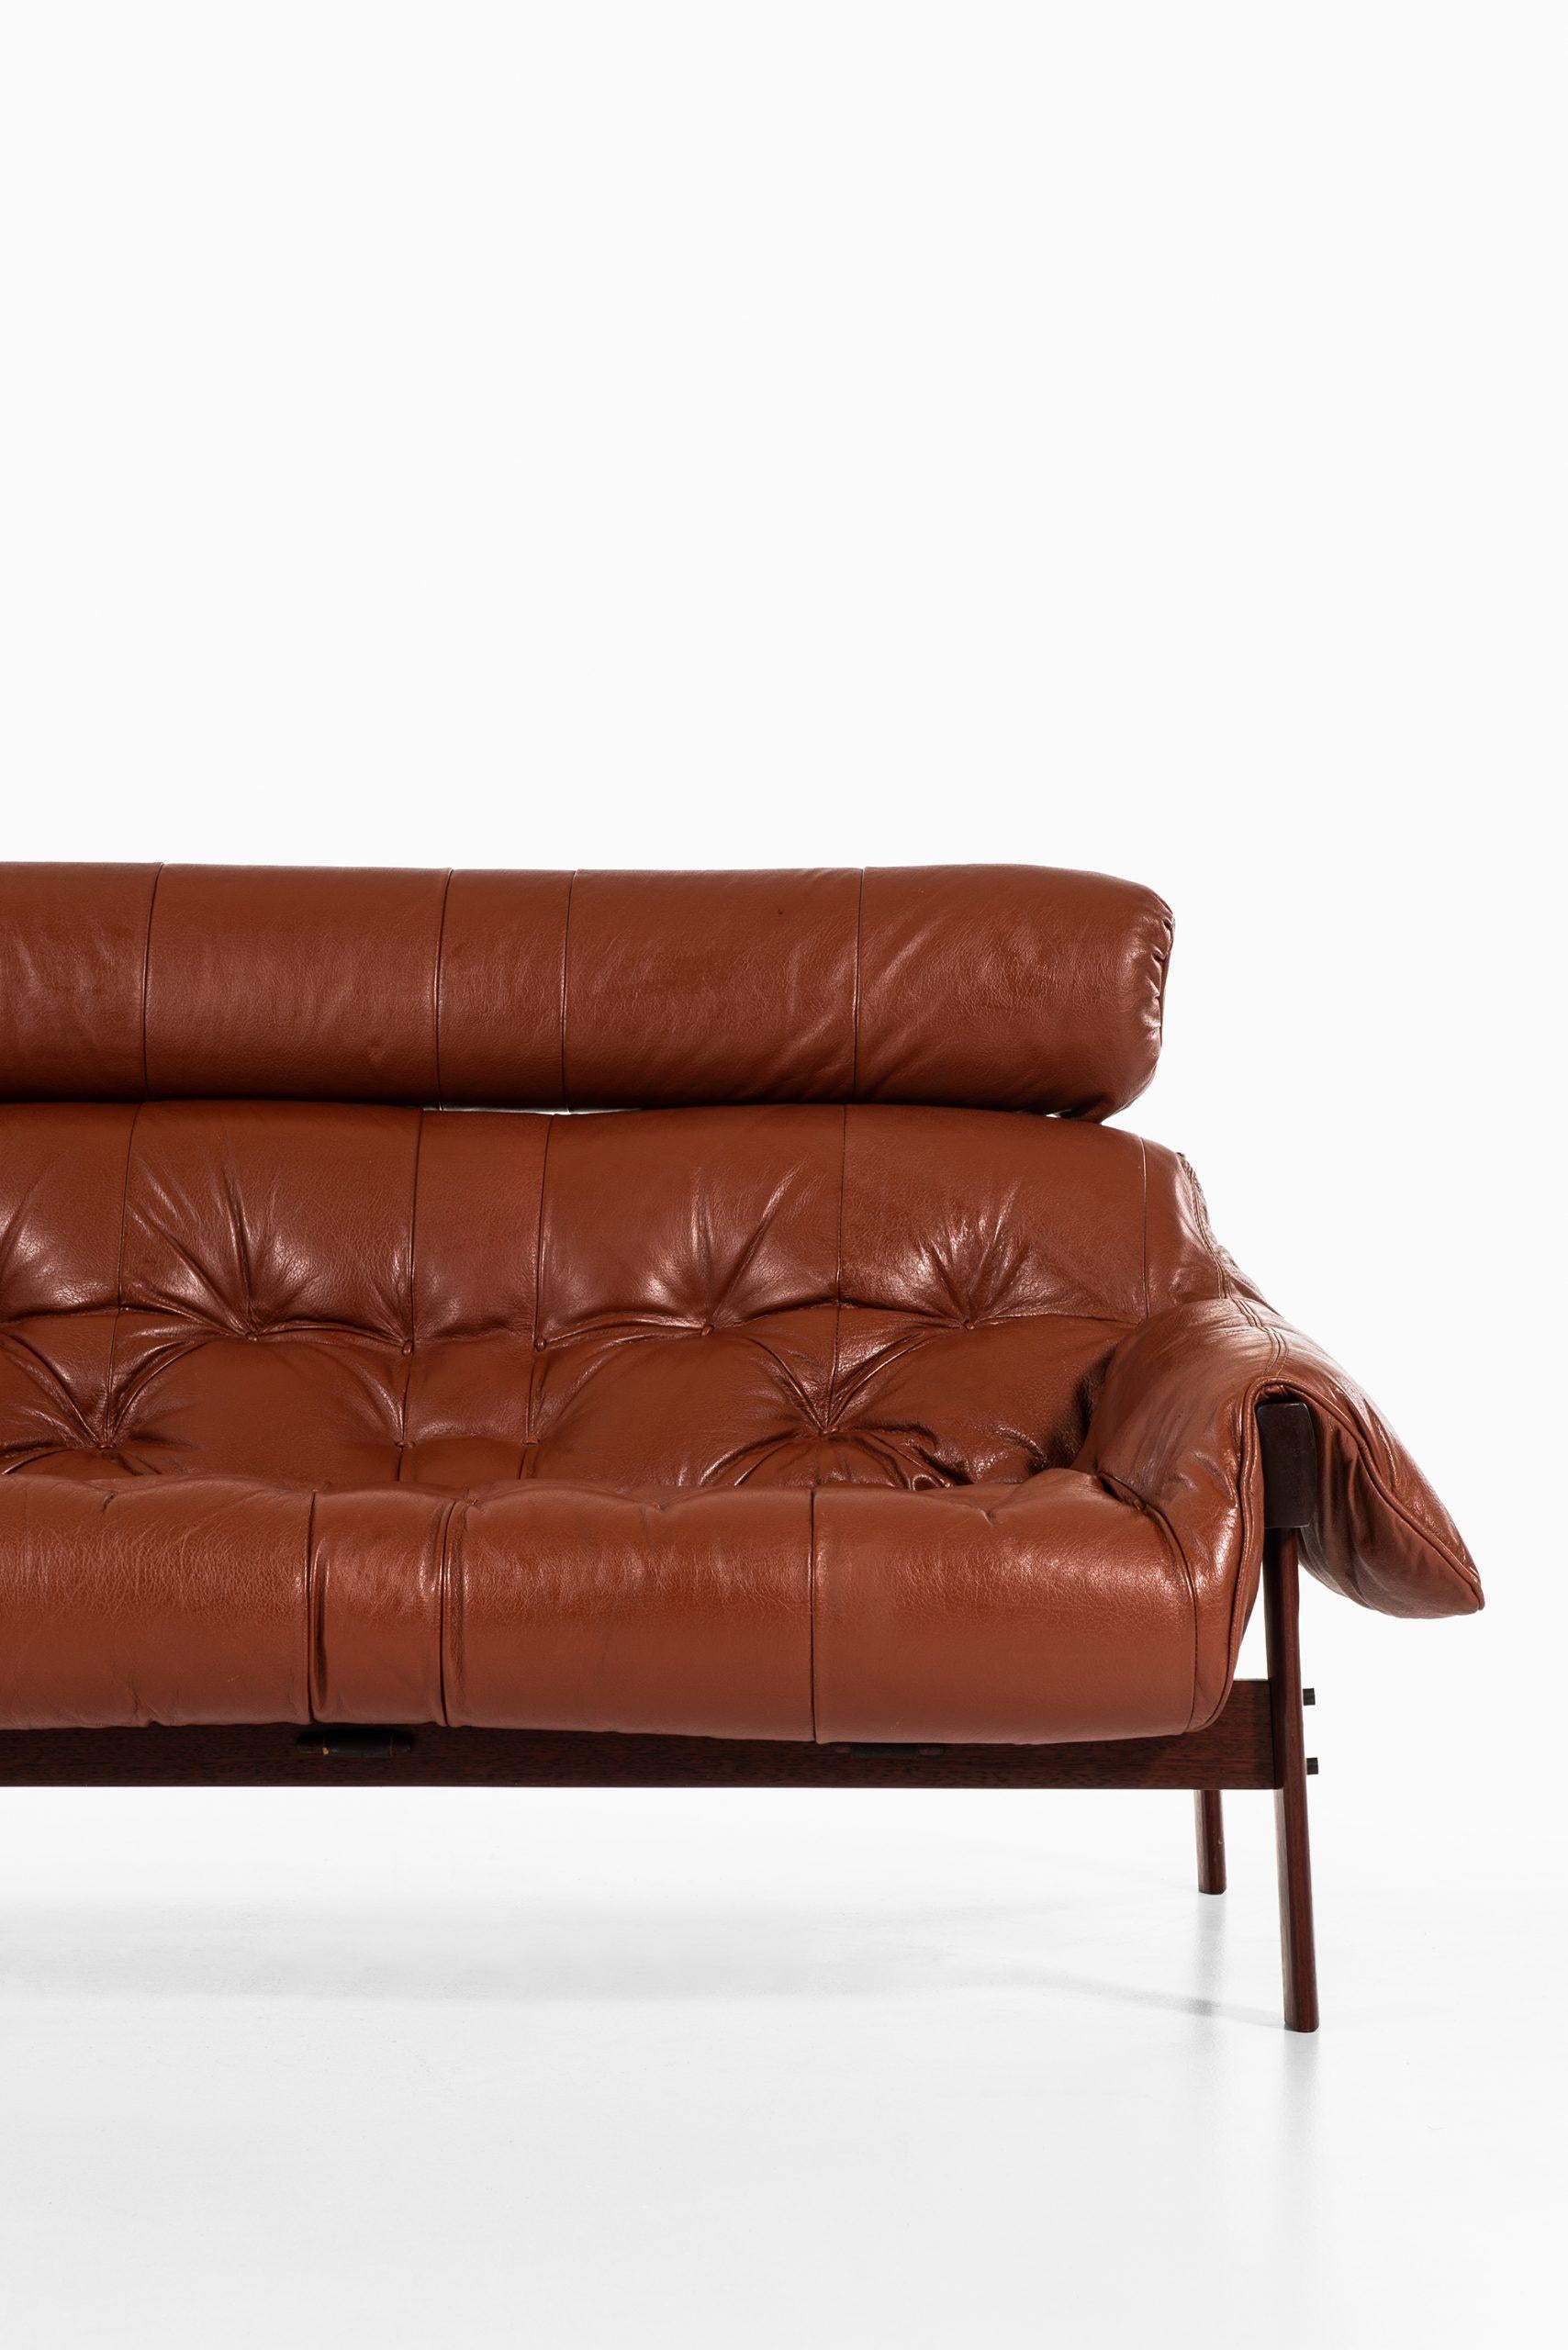 Rare 3-seat sofa designed by Percival Lafer. Produced by Lafer MP in Brazil.